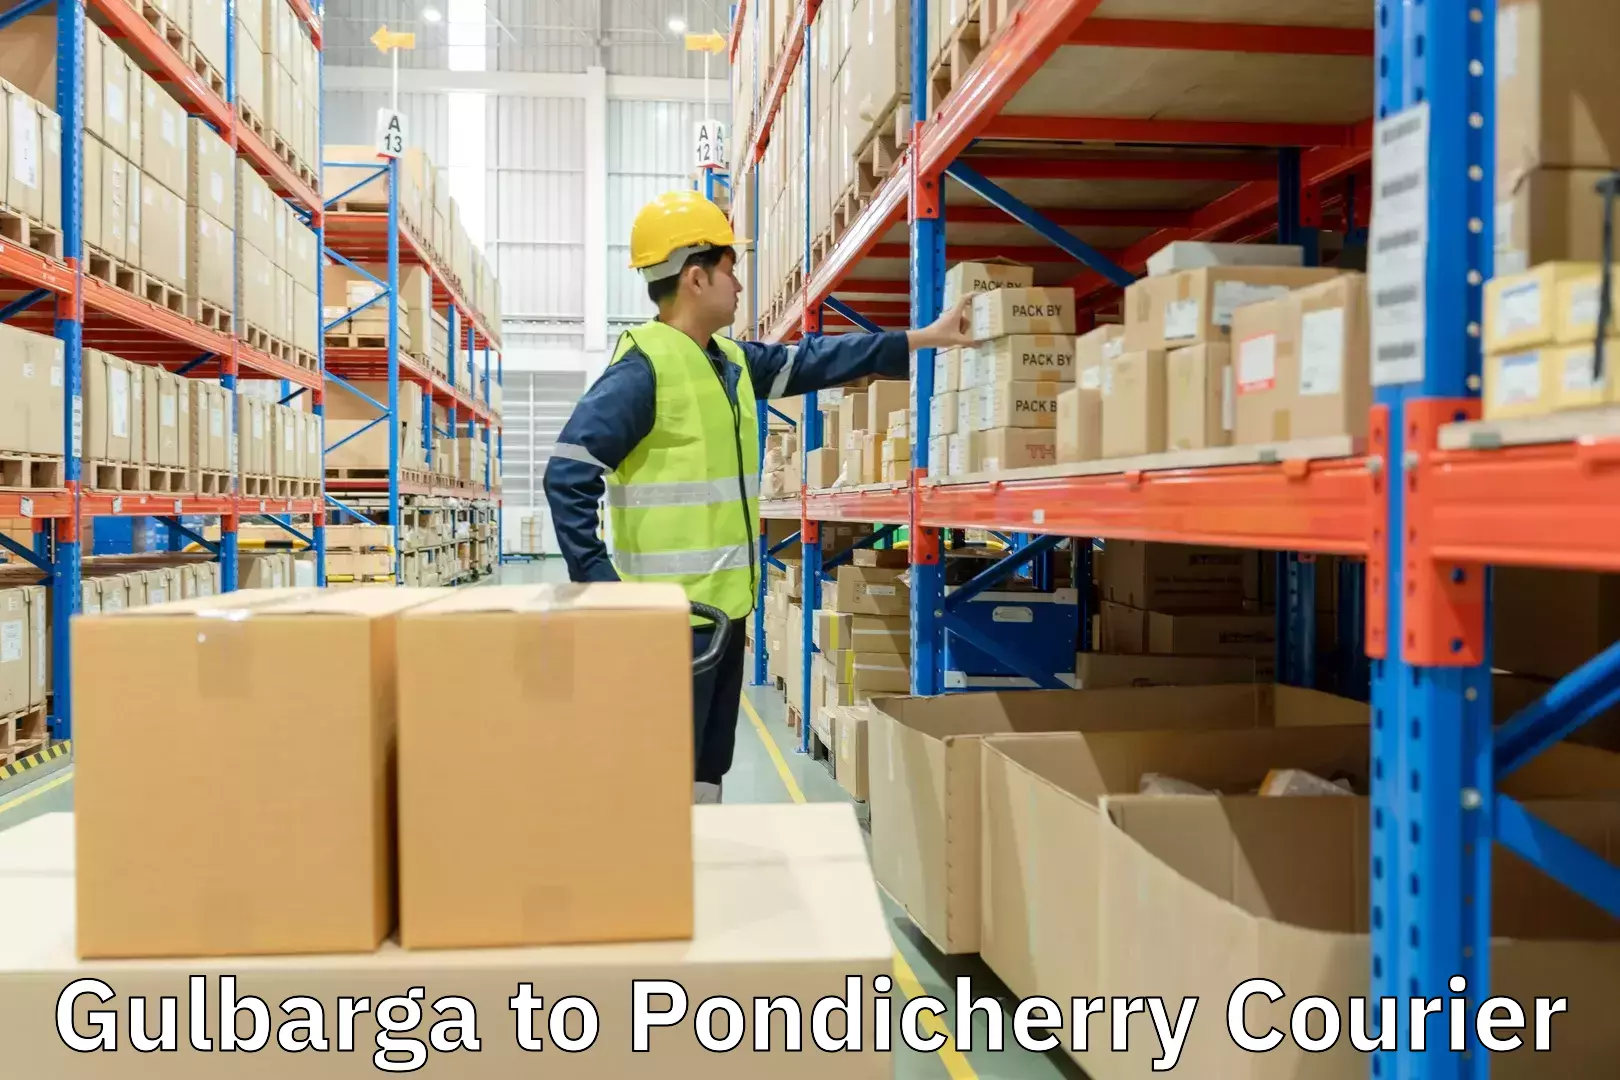 Subscription-based courier Gulbarga to Pondicherry